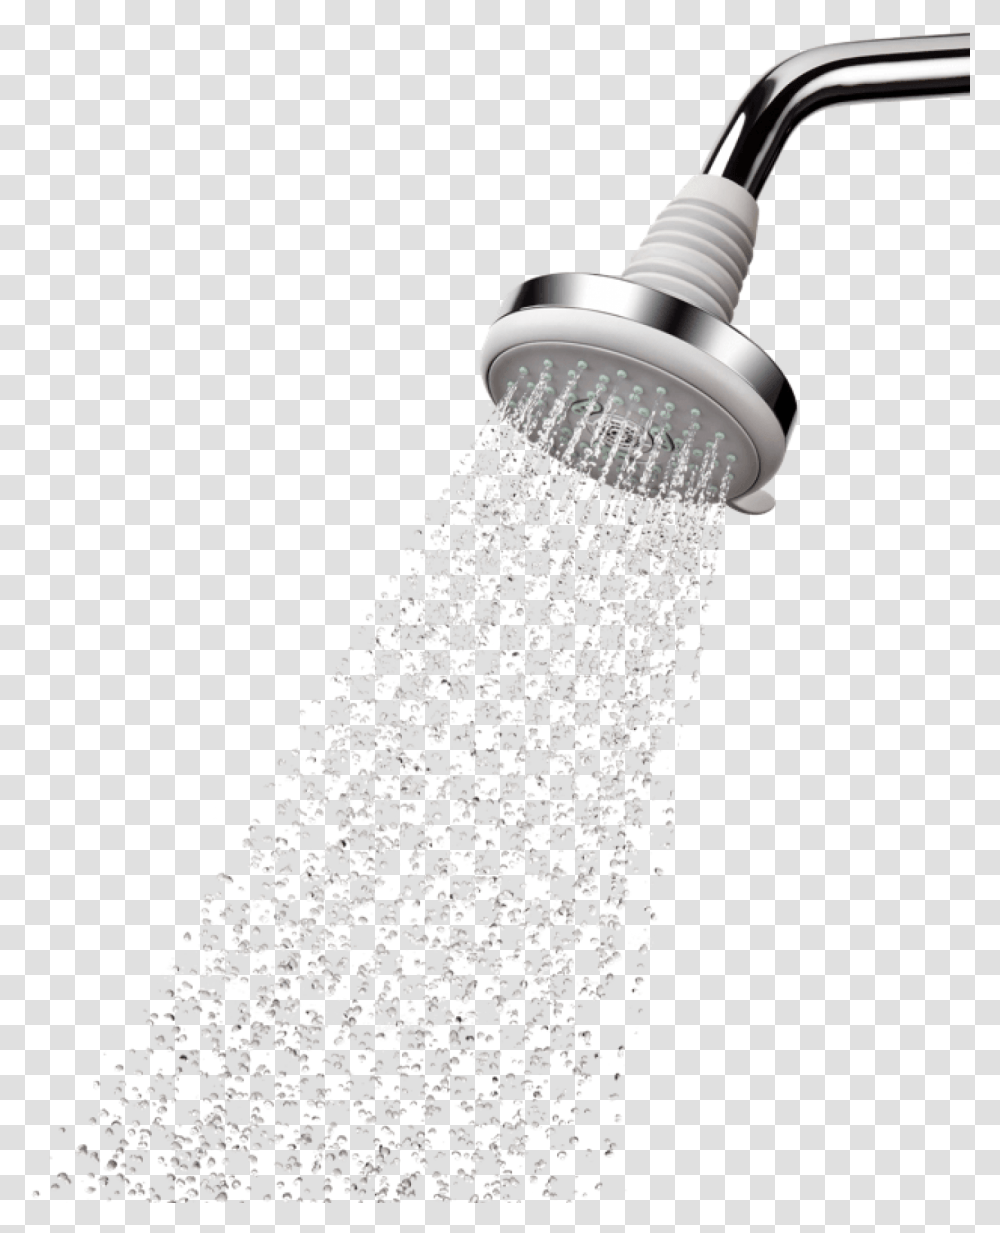 Get Saving Showerheads And Water From Shower, Room, Indoors, Bathroom, Shower Faucet Transparent Png